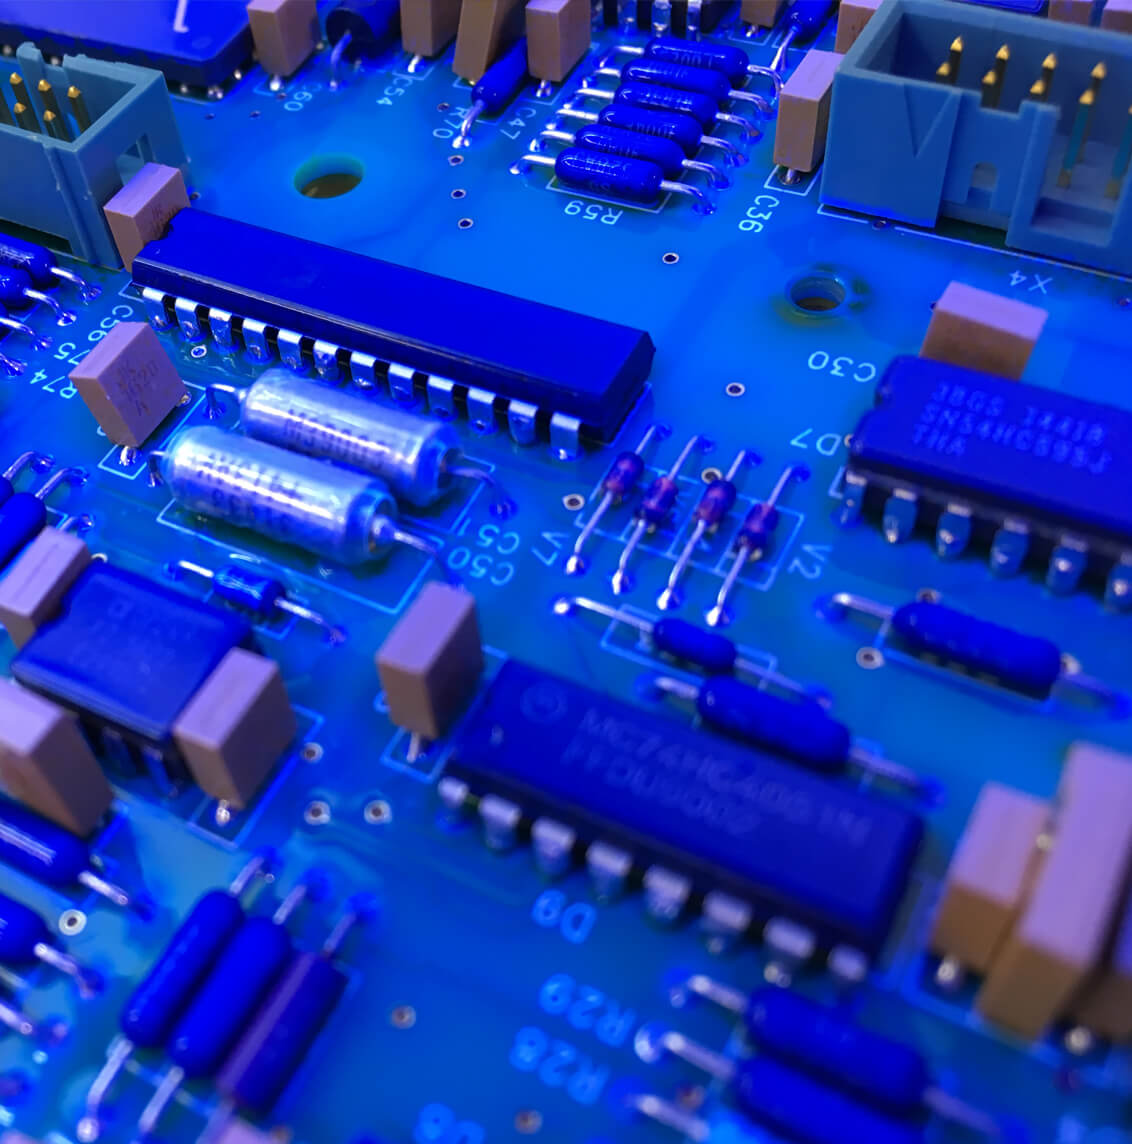 Rapier Electronics Adelaide - printed circuit board parts pic a circuit board under a blue light inspection